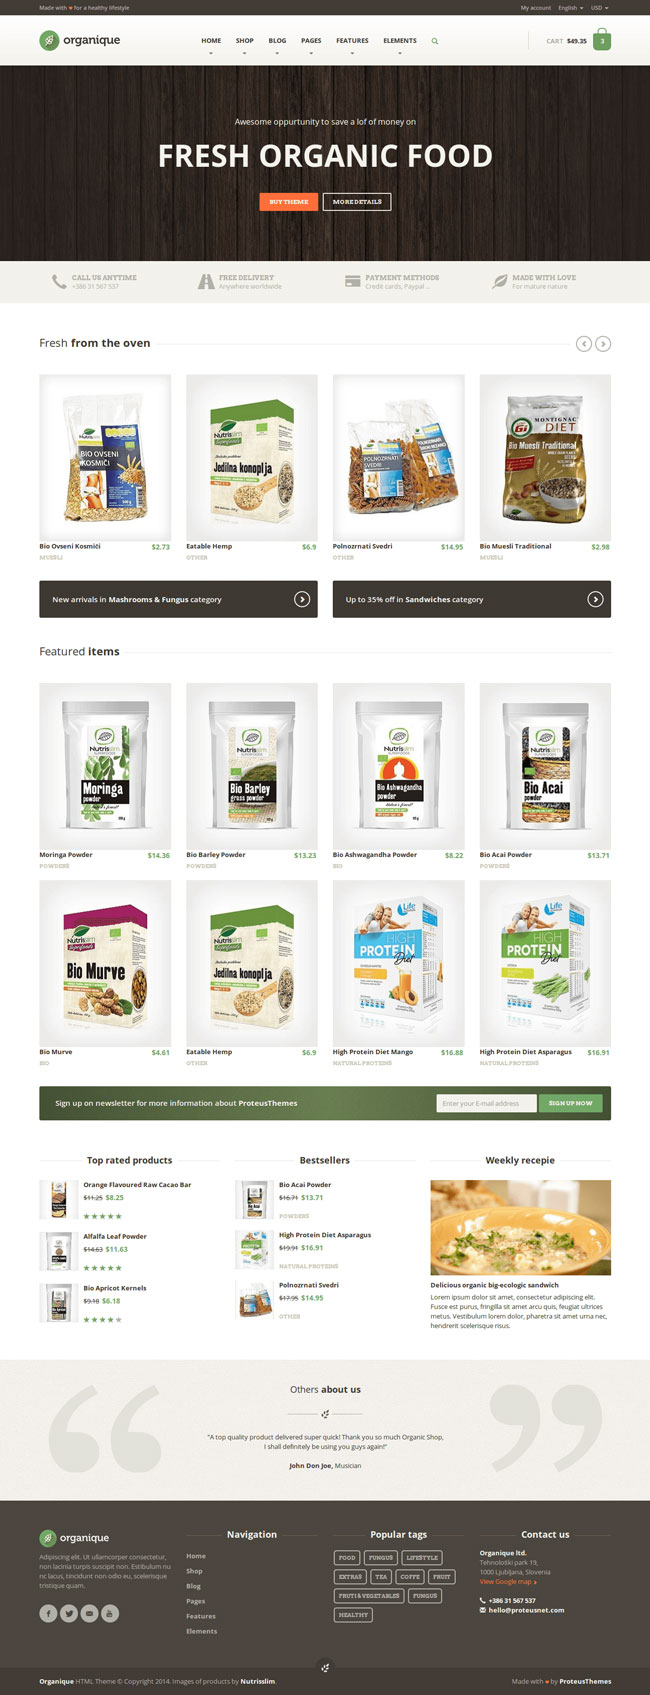 Organique-WordPress-Theme-For-Healthy-Food-Shop